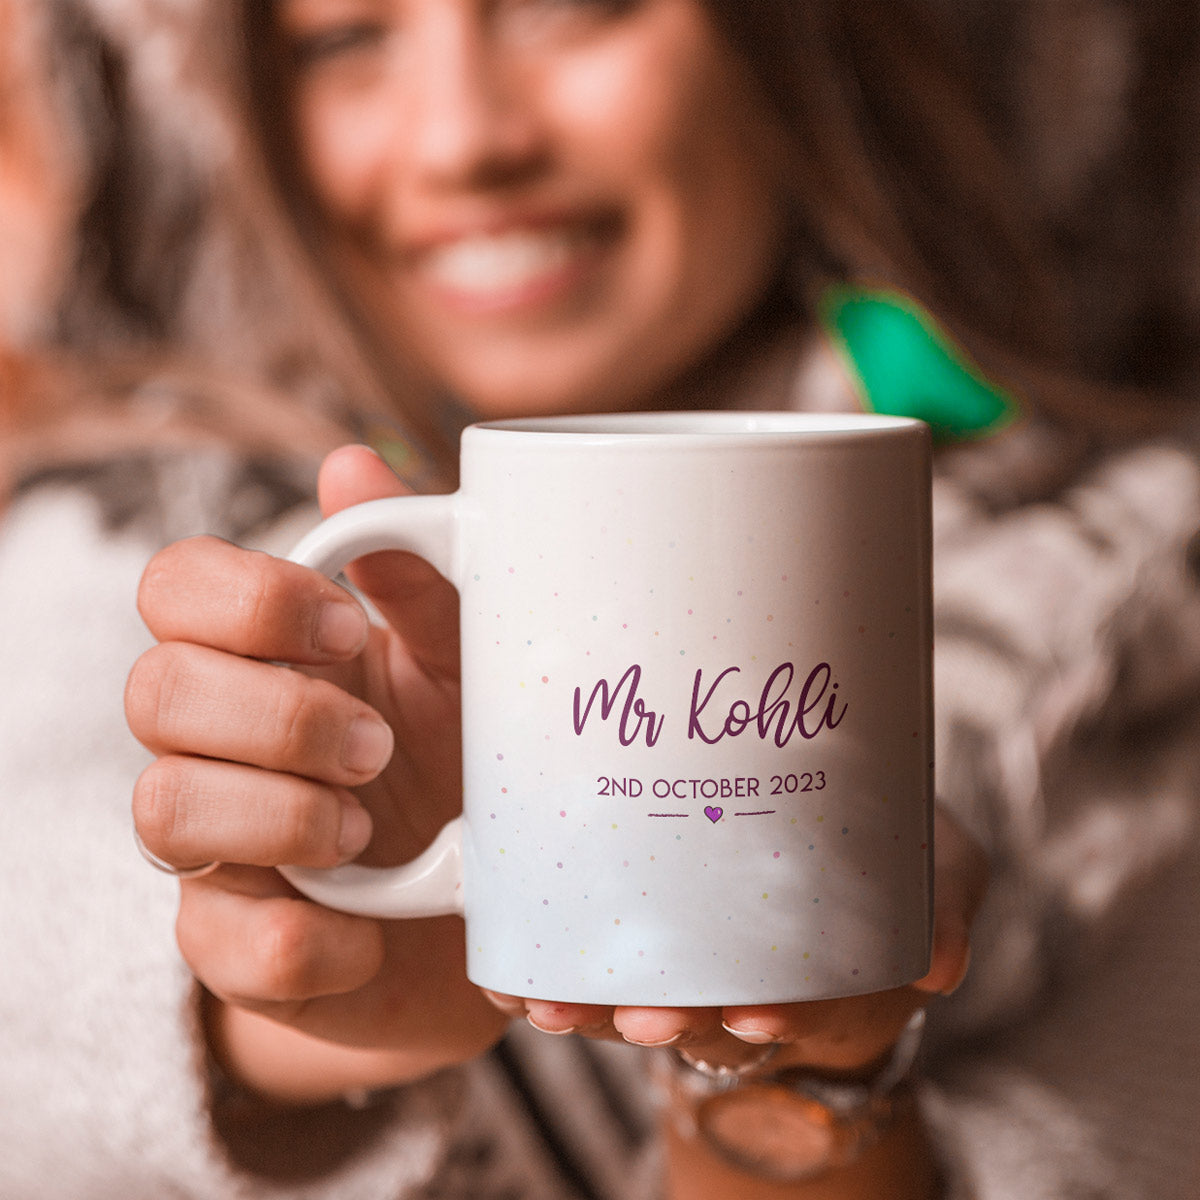 Kiss The Cup|valentine's Day Couple Mug Set - Ceramic Kiss Cup Wedding Gift